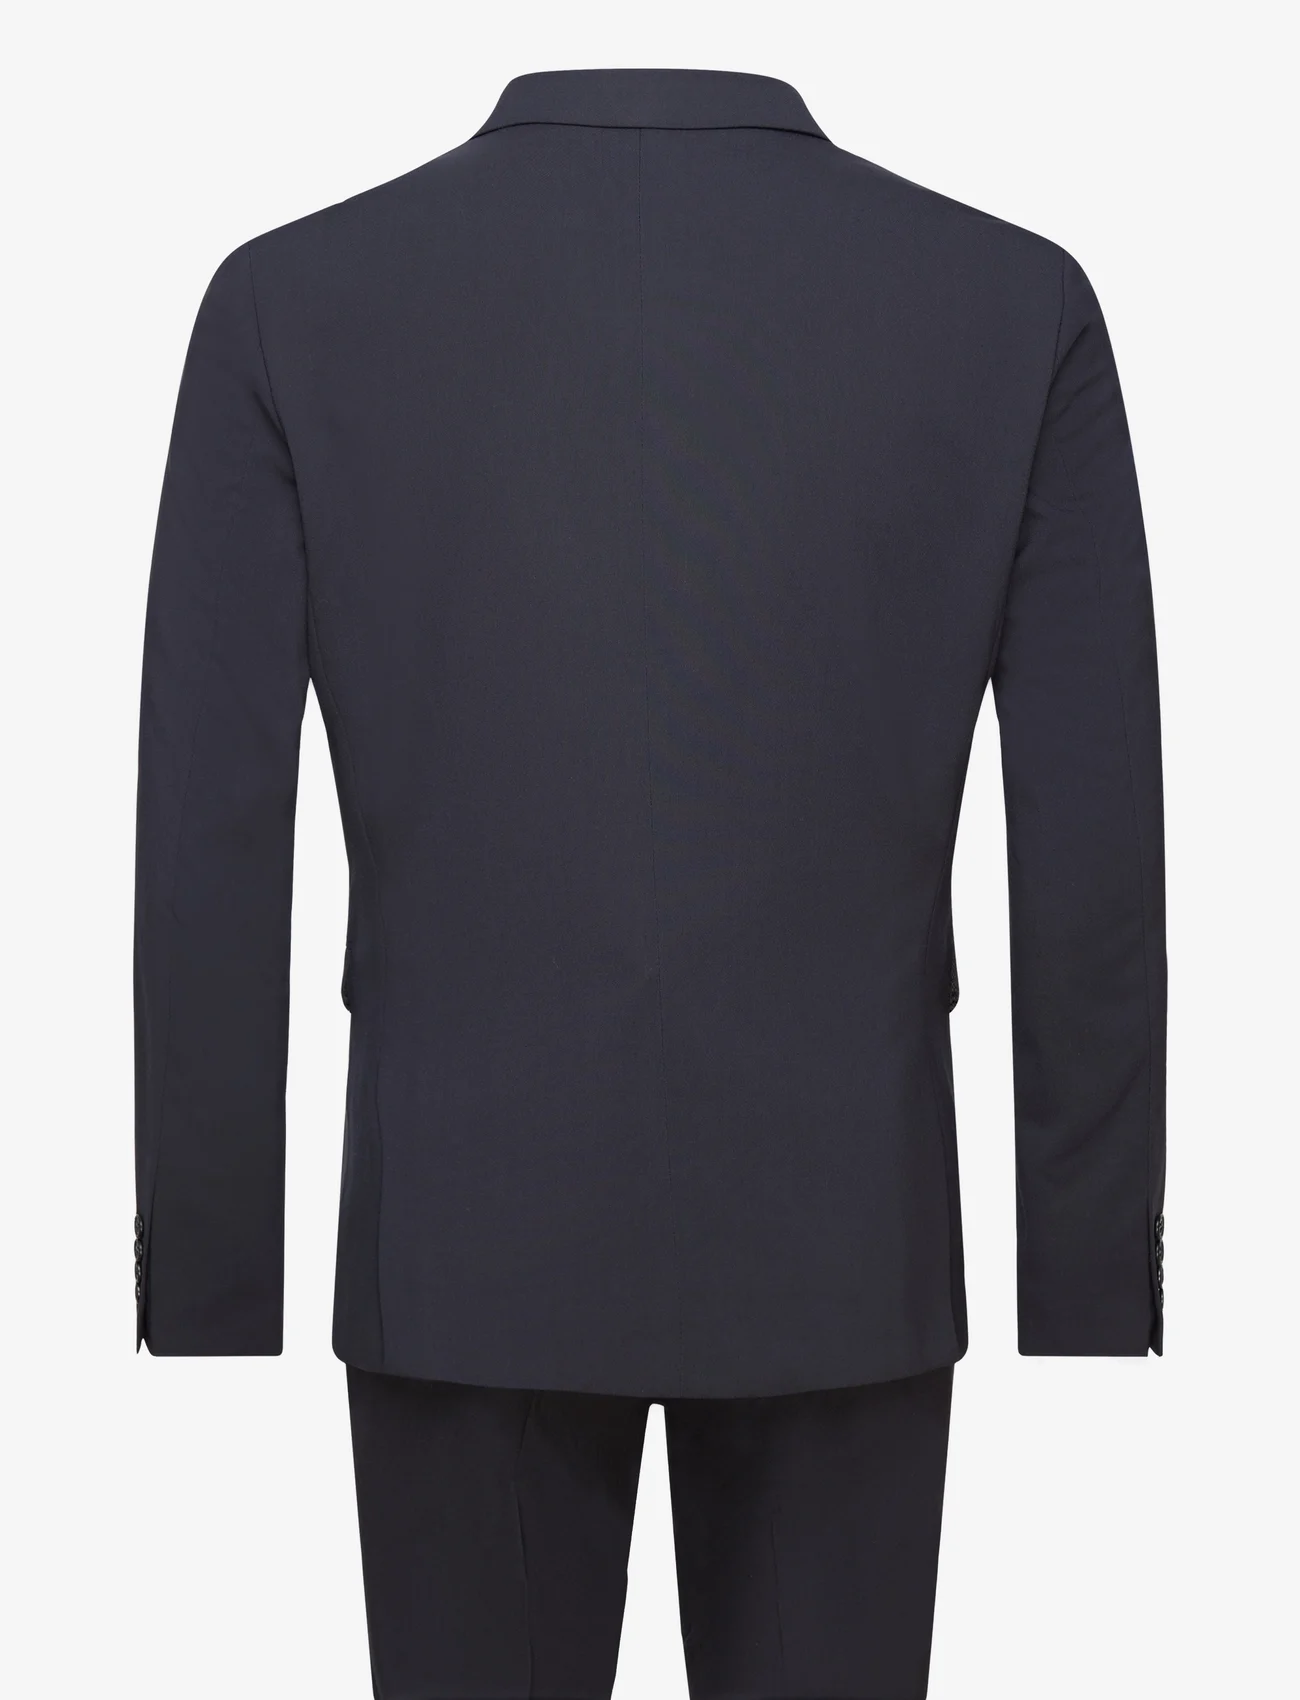 Lindbergh - Plain DB mens suit - normal lenght - double breasted suits - navy - 1